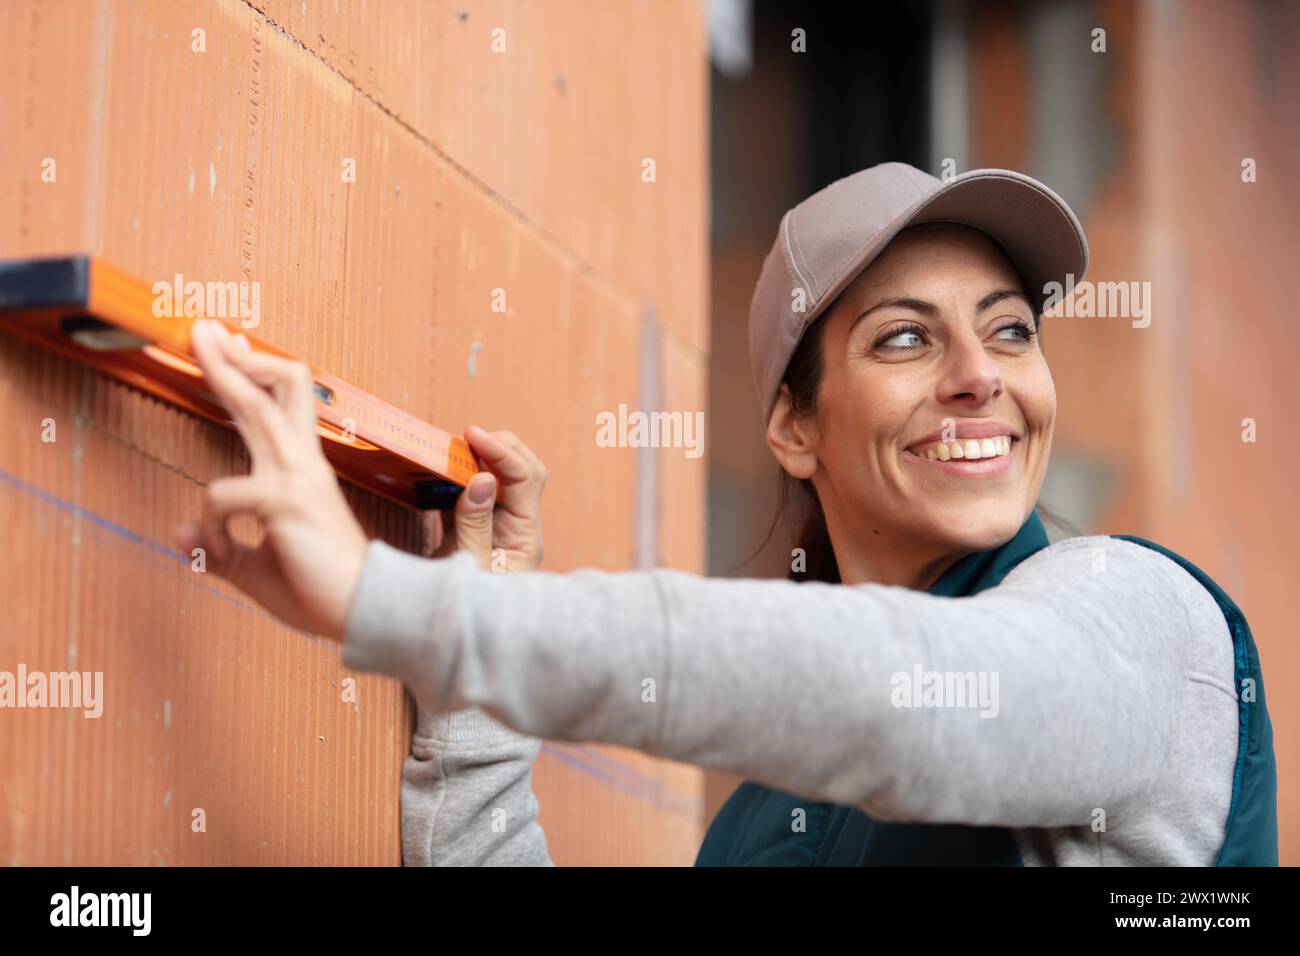 female builder keeps the building level in front of her Stock Photo